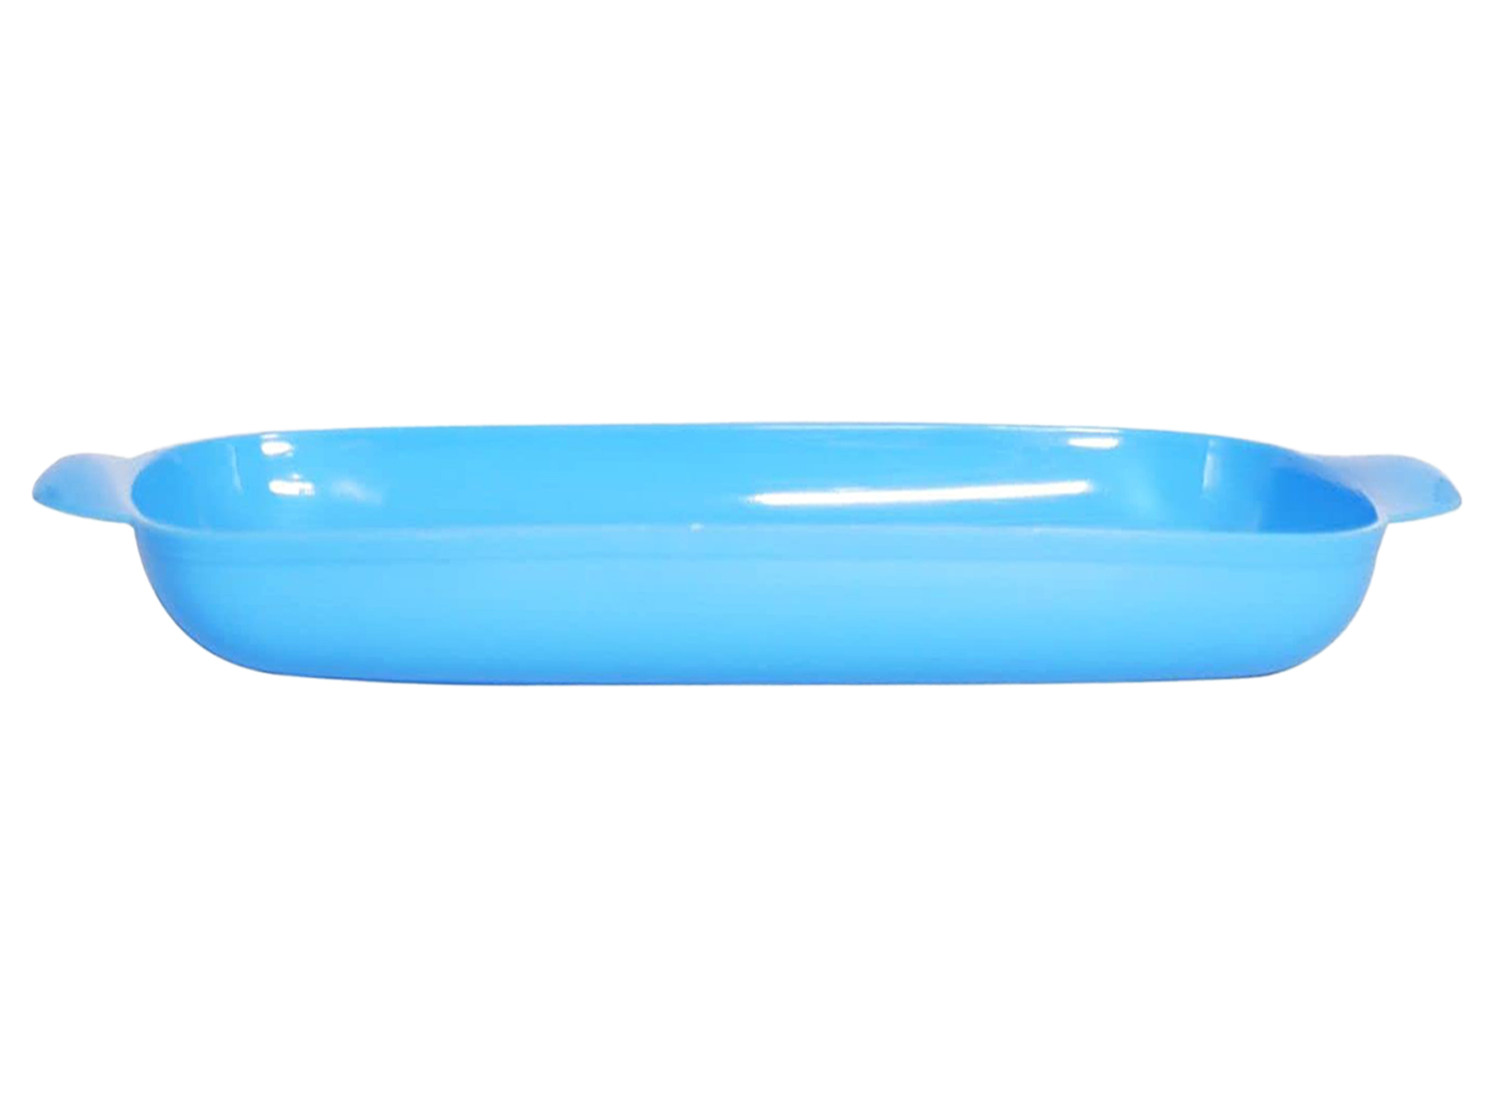 Kuber Industries Plastic 2 Bowls & 1 Tray Set For Serving & Store Dry Fruits, candies, Snacks With Silicon Rubberized Ring Lid (Blue)